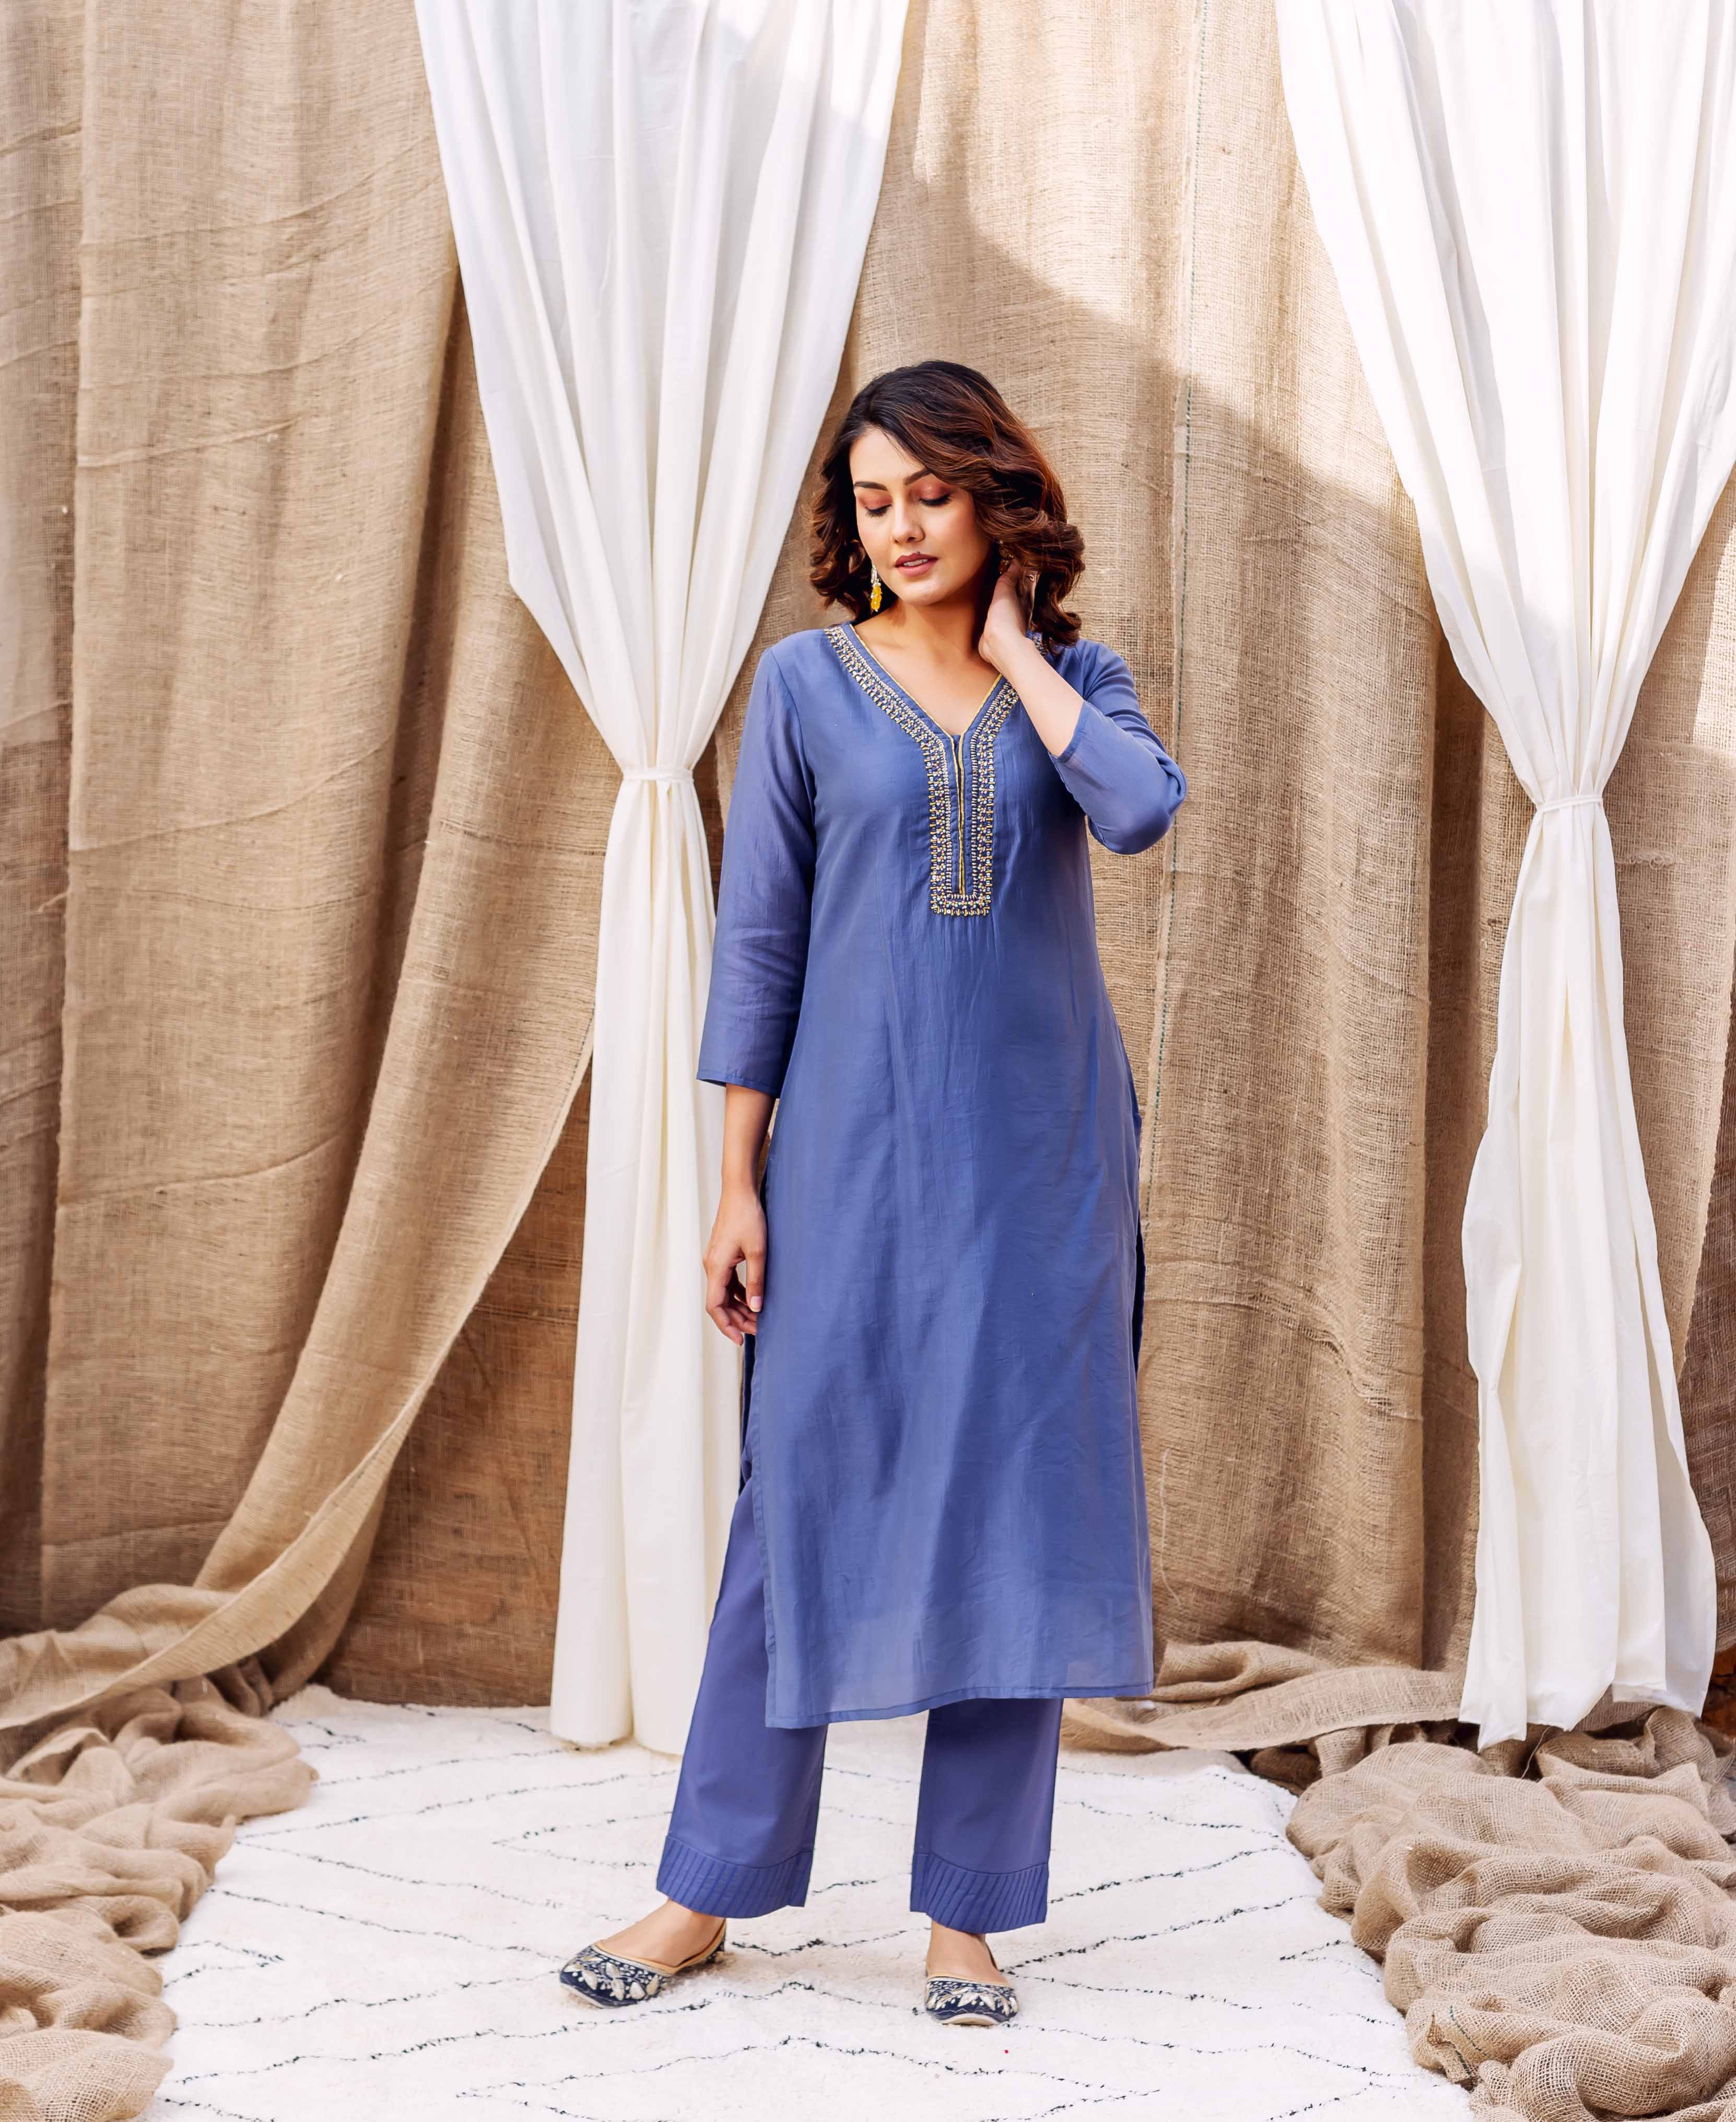 How To Look Slim In A Kurti